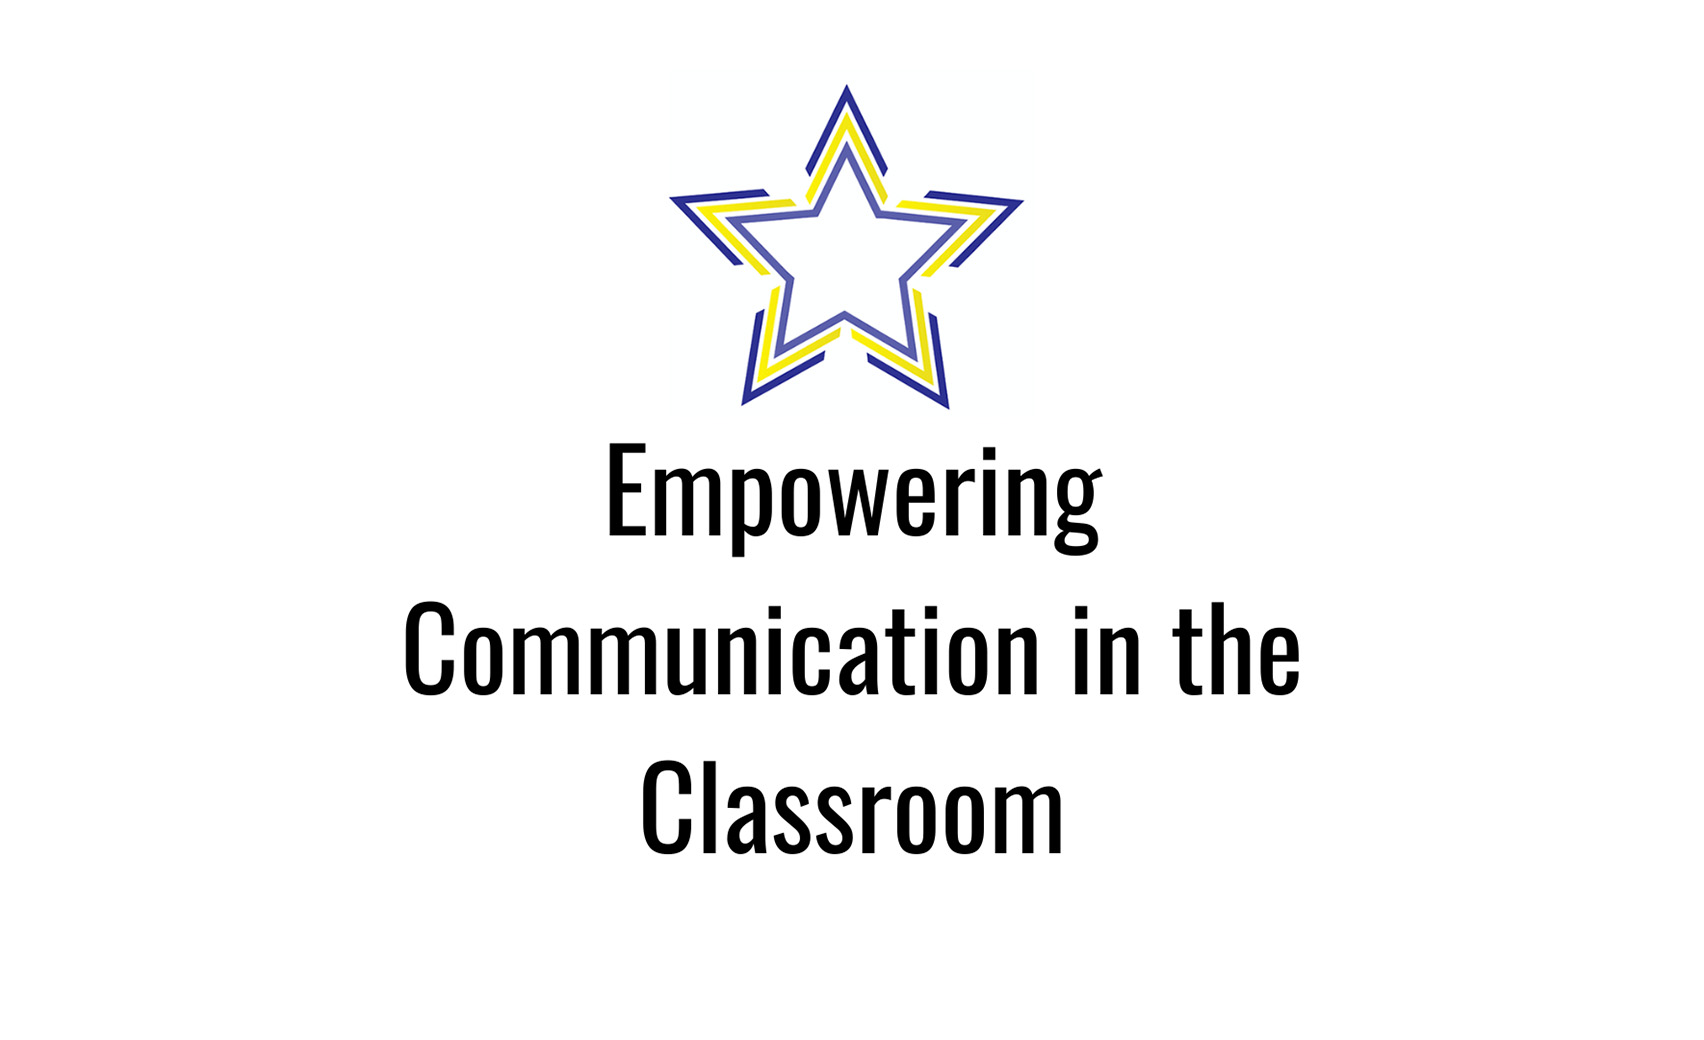 Empowering Communication in the Classroom